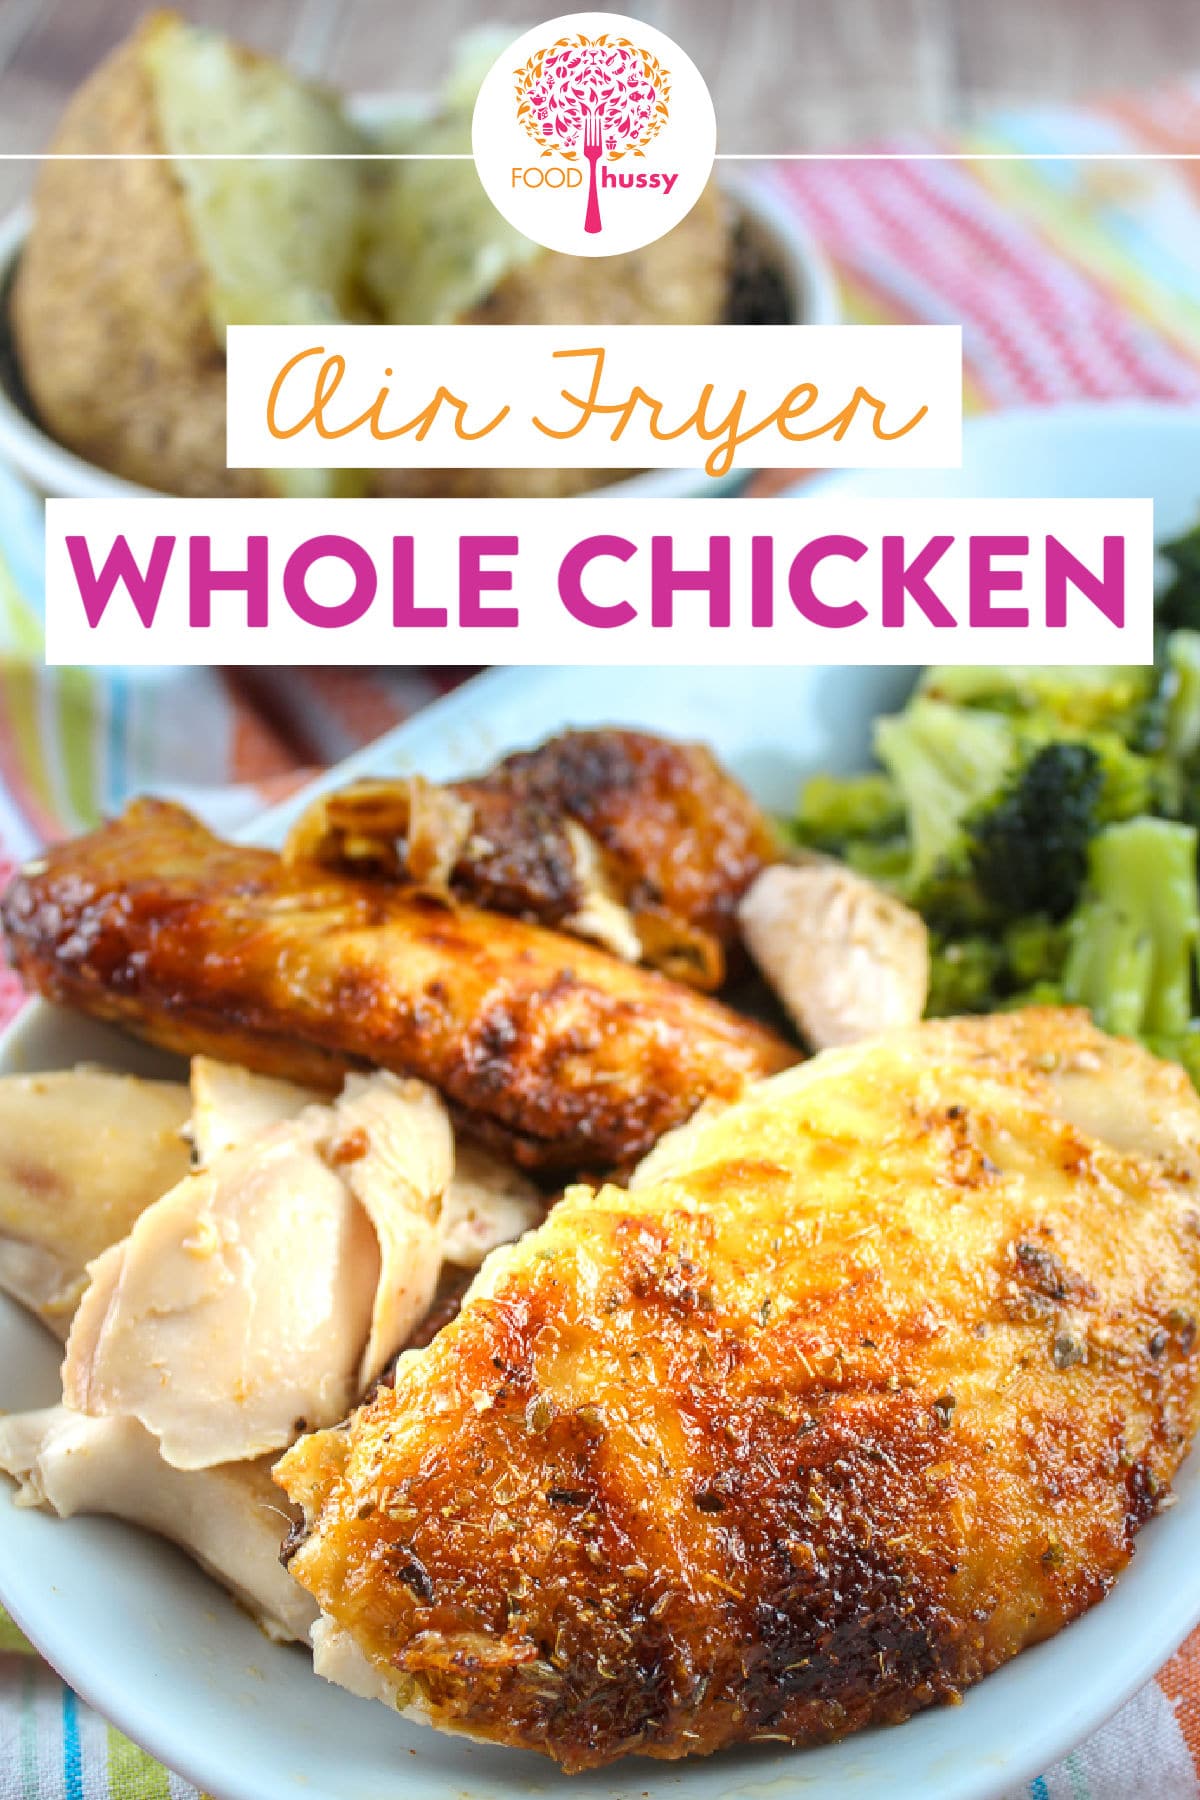 Making a whole chicken in the air fryer is super simple and makes the juiciest, most delicious chicken you'll ever have. It's great night one with mashed potatoes and veggies - but the leftovers are even better! They're perfect for sandwiches, casseroles and more!  via @foodhussy